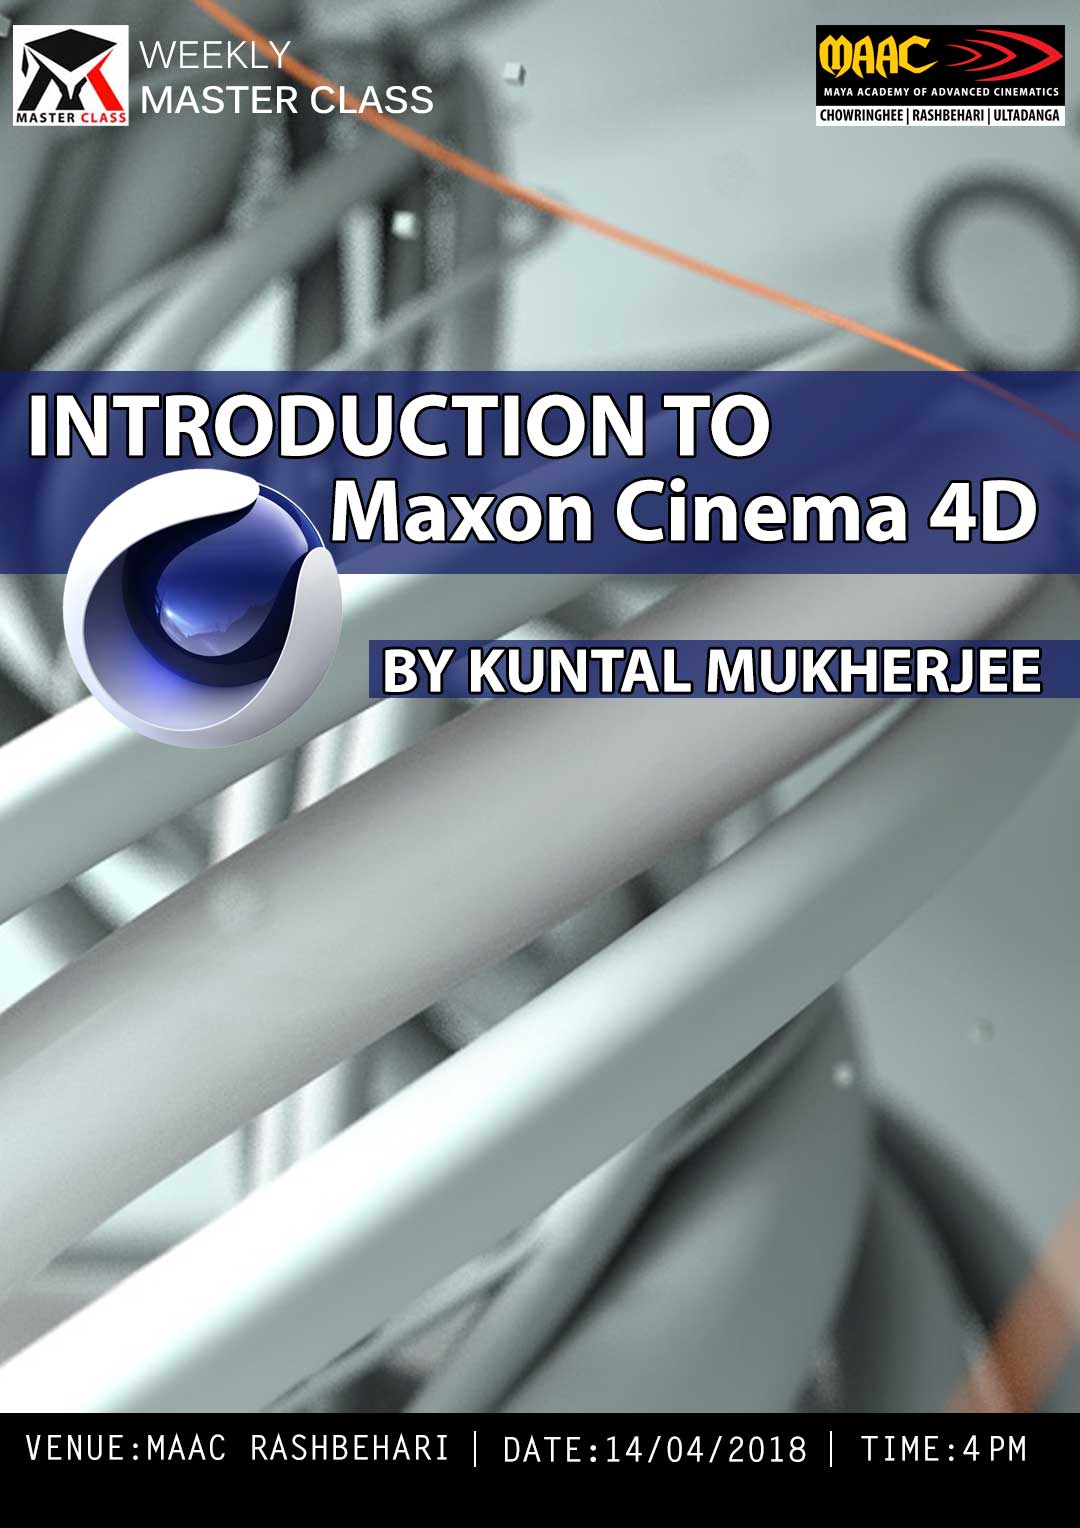 Weekly Master Class on Introduction to Maxon Cinema 4D